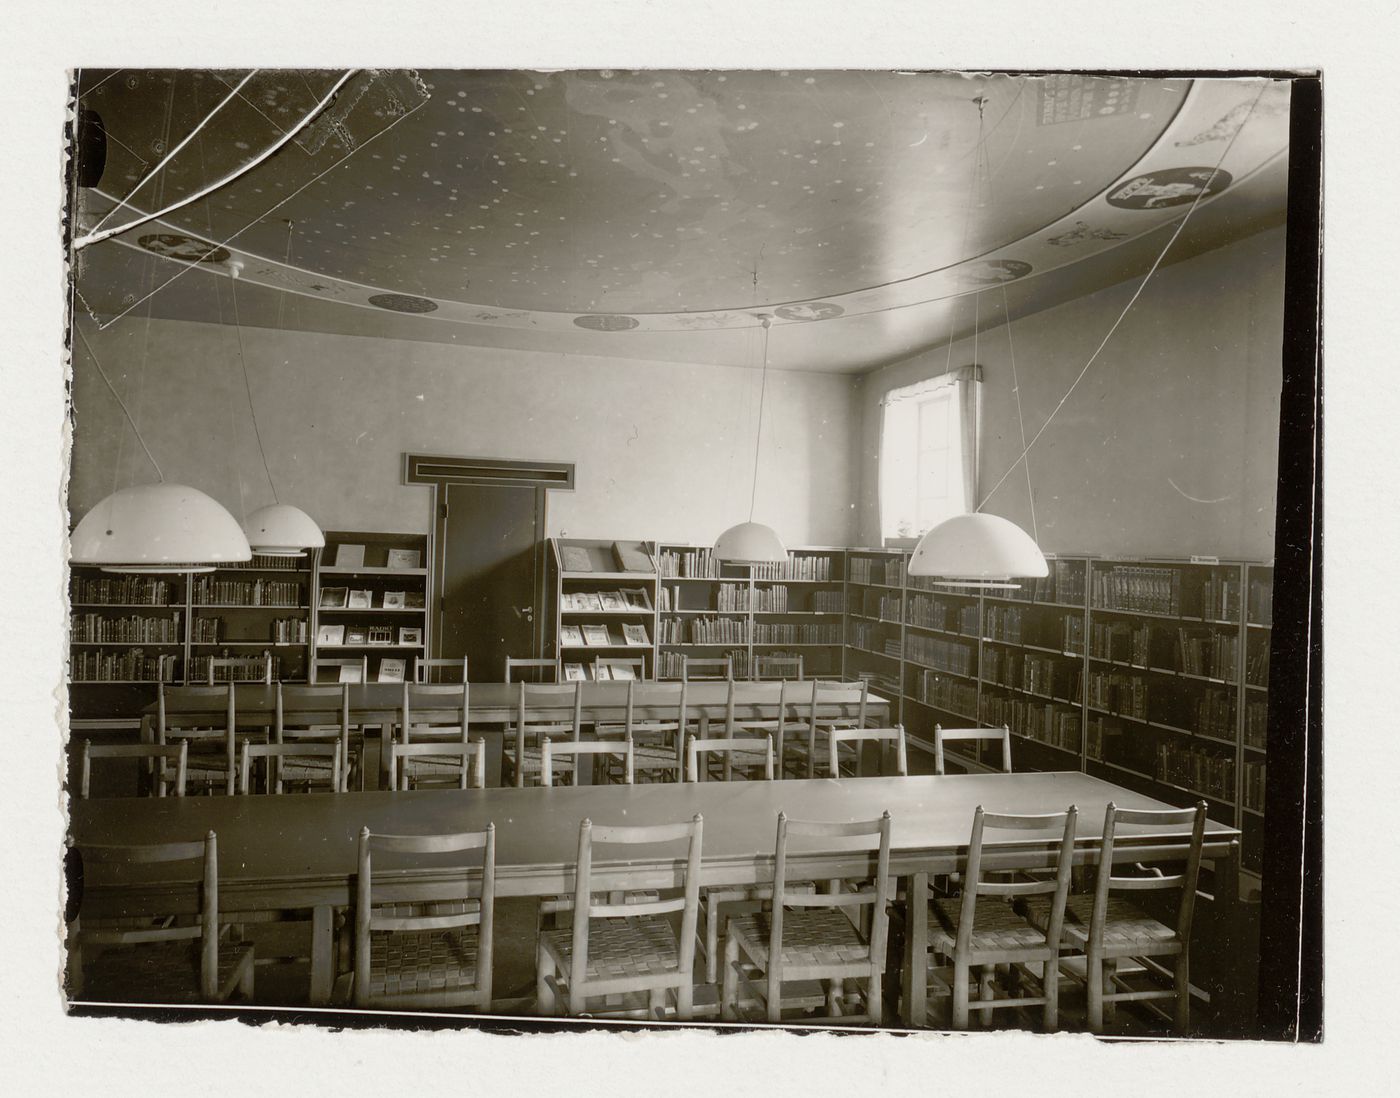 Interior view of the children's reading room of Stockholm Public Library showing tables, chairs and bookshelves, 51-55 Odengatan, Stockholm